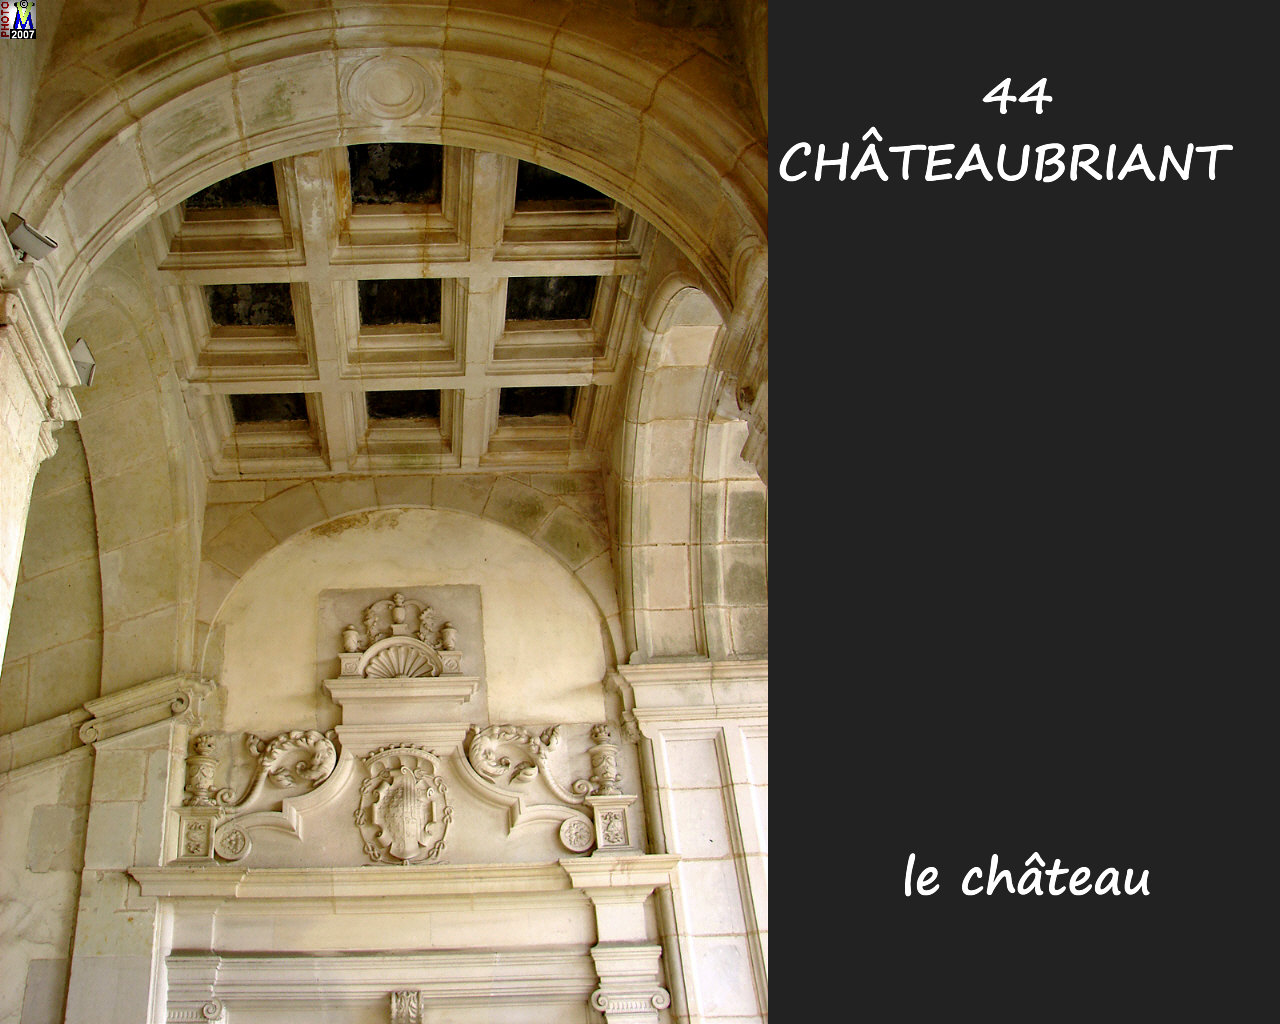 44CHATEAUBRIANT_chateau_224.jpg